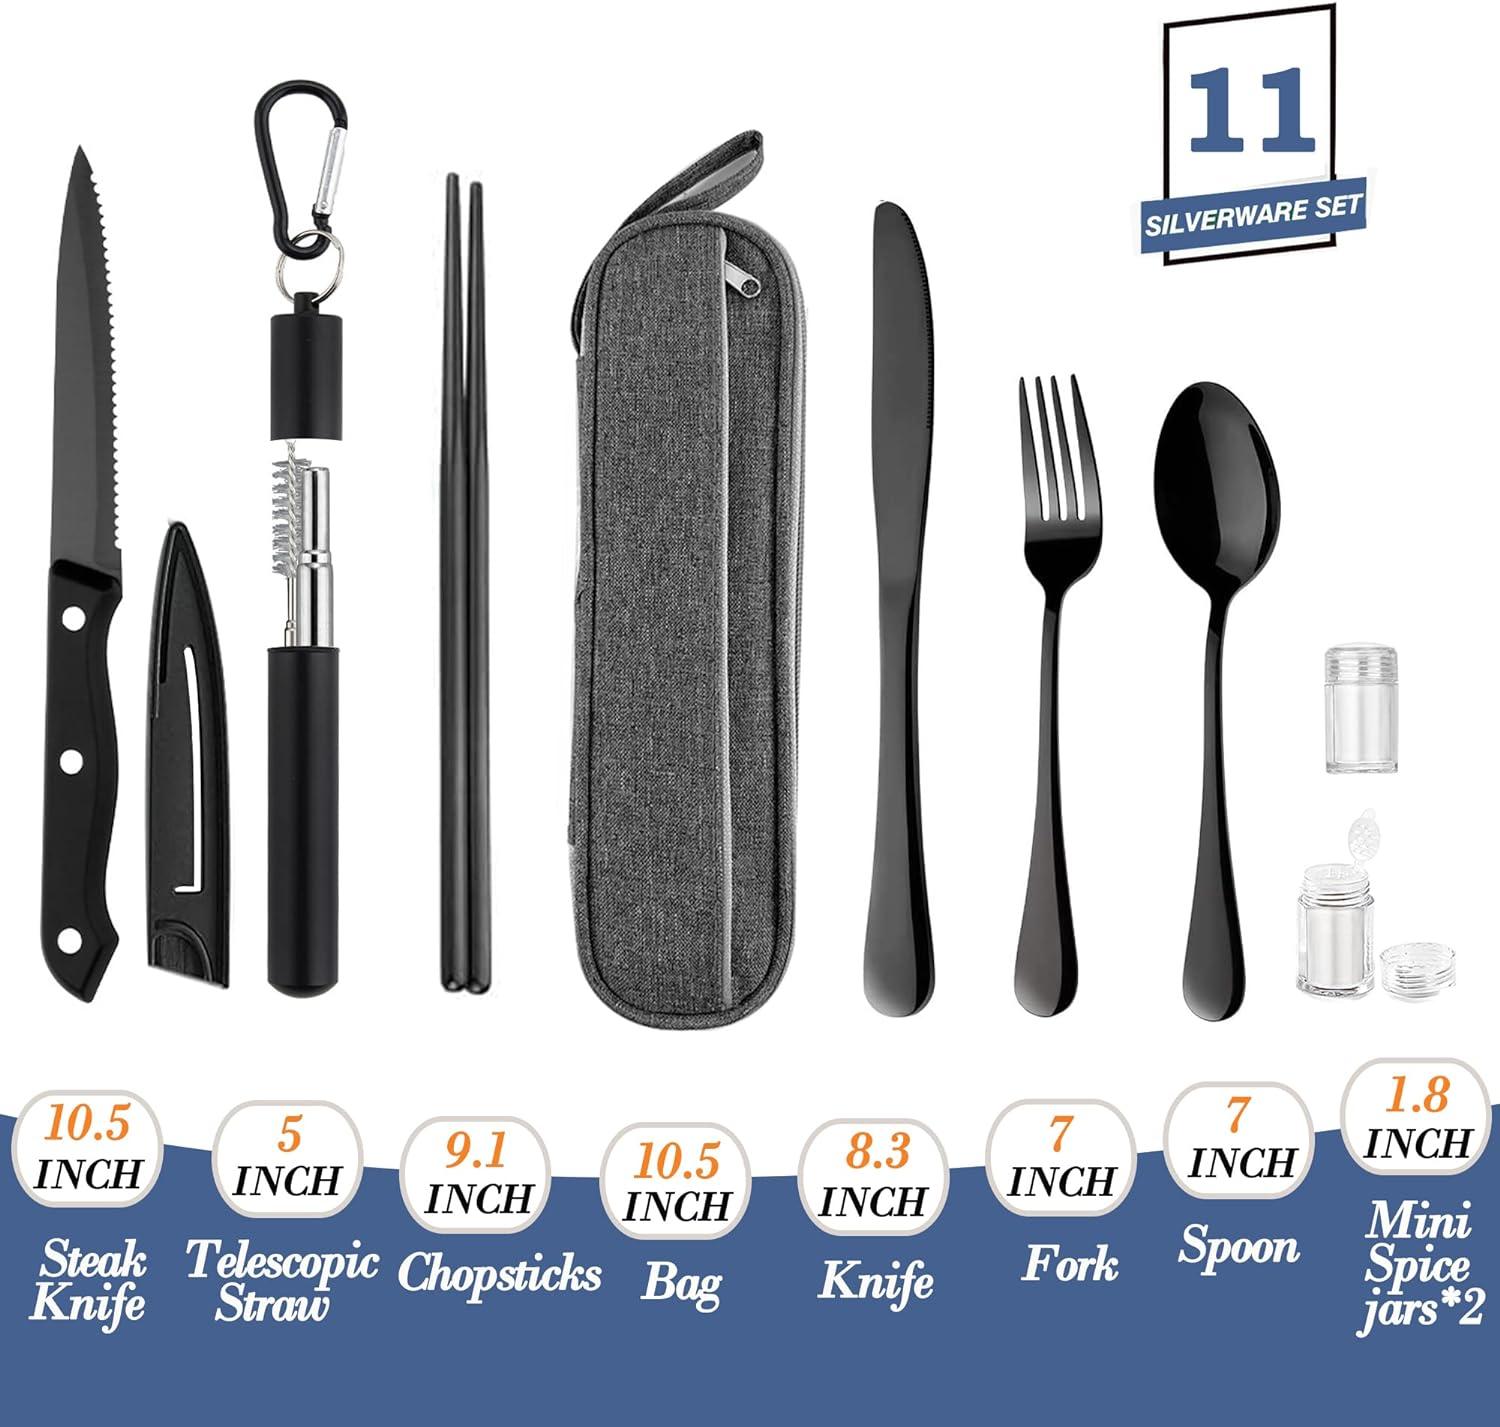 Travelwant Portable Travel Utensils Set with Case Reusable Cutlery Set Stainless Steel Chopsticks Spoon and Fork with Case for Lunch Box Travel and